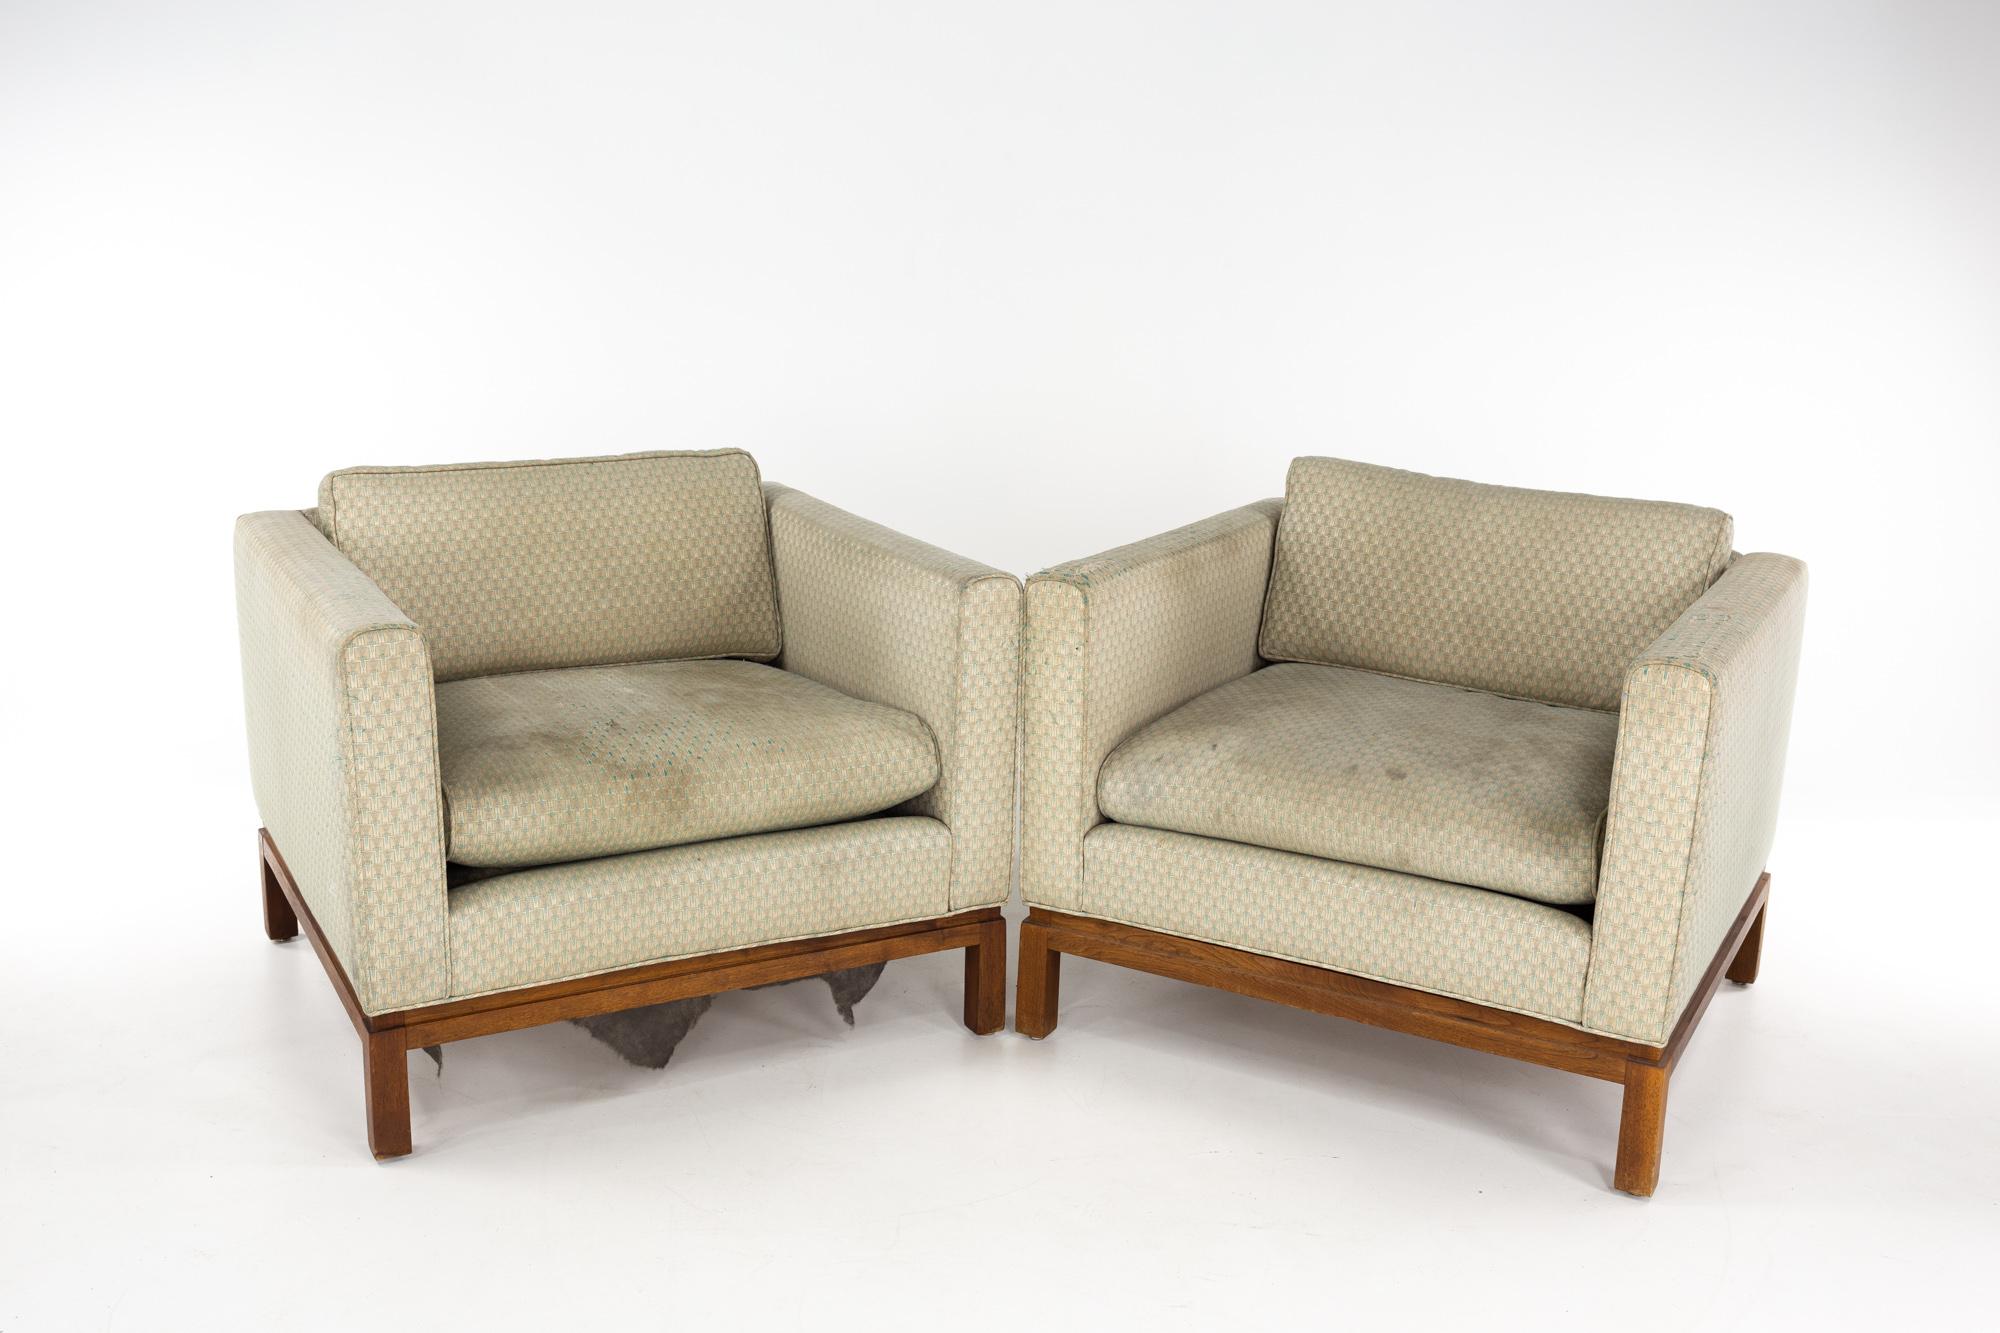 Milo Baughman style mid century walnut club chairs - a pair

Each chair measures: 34 wide x 32.5 deep x 26.5 inches high, with a seat height of 19 and arm height of 26.5 inches

Ready for new upholstery. This service is available for an